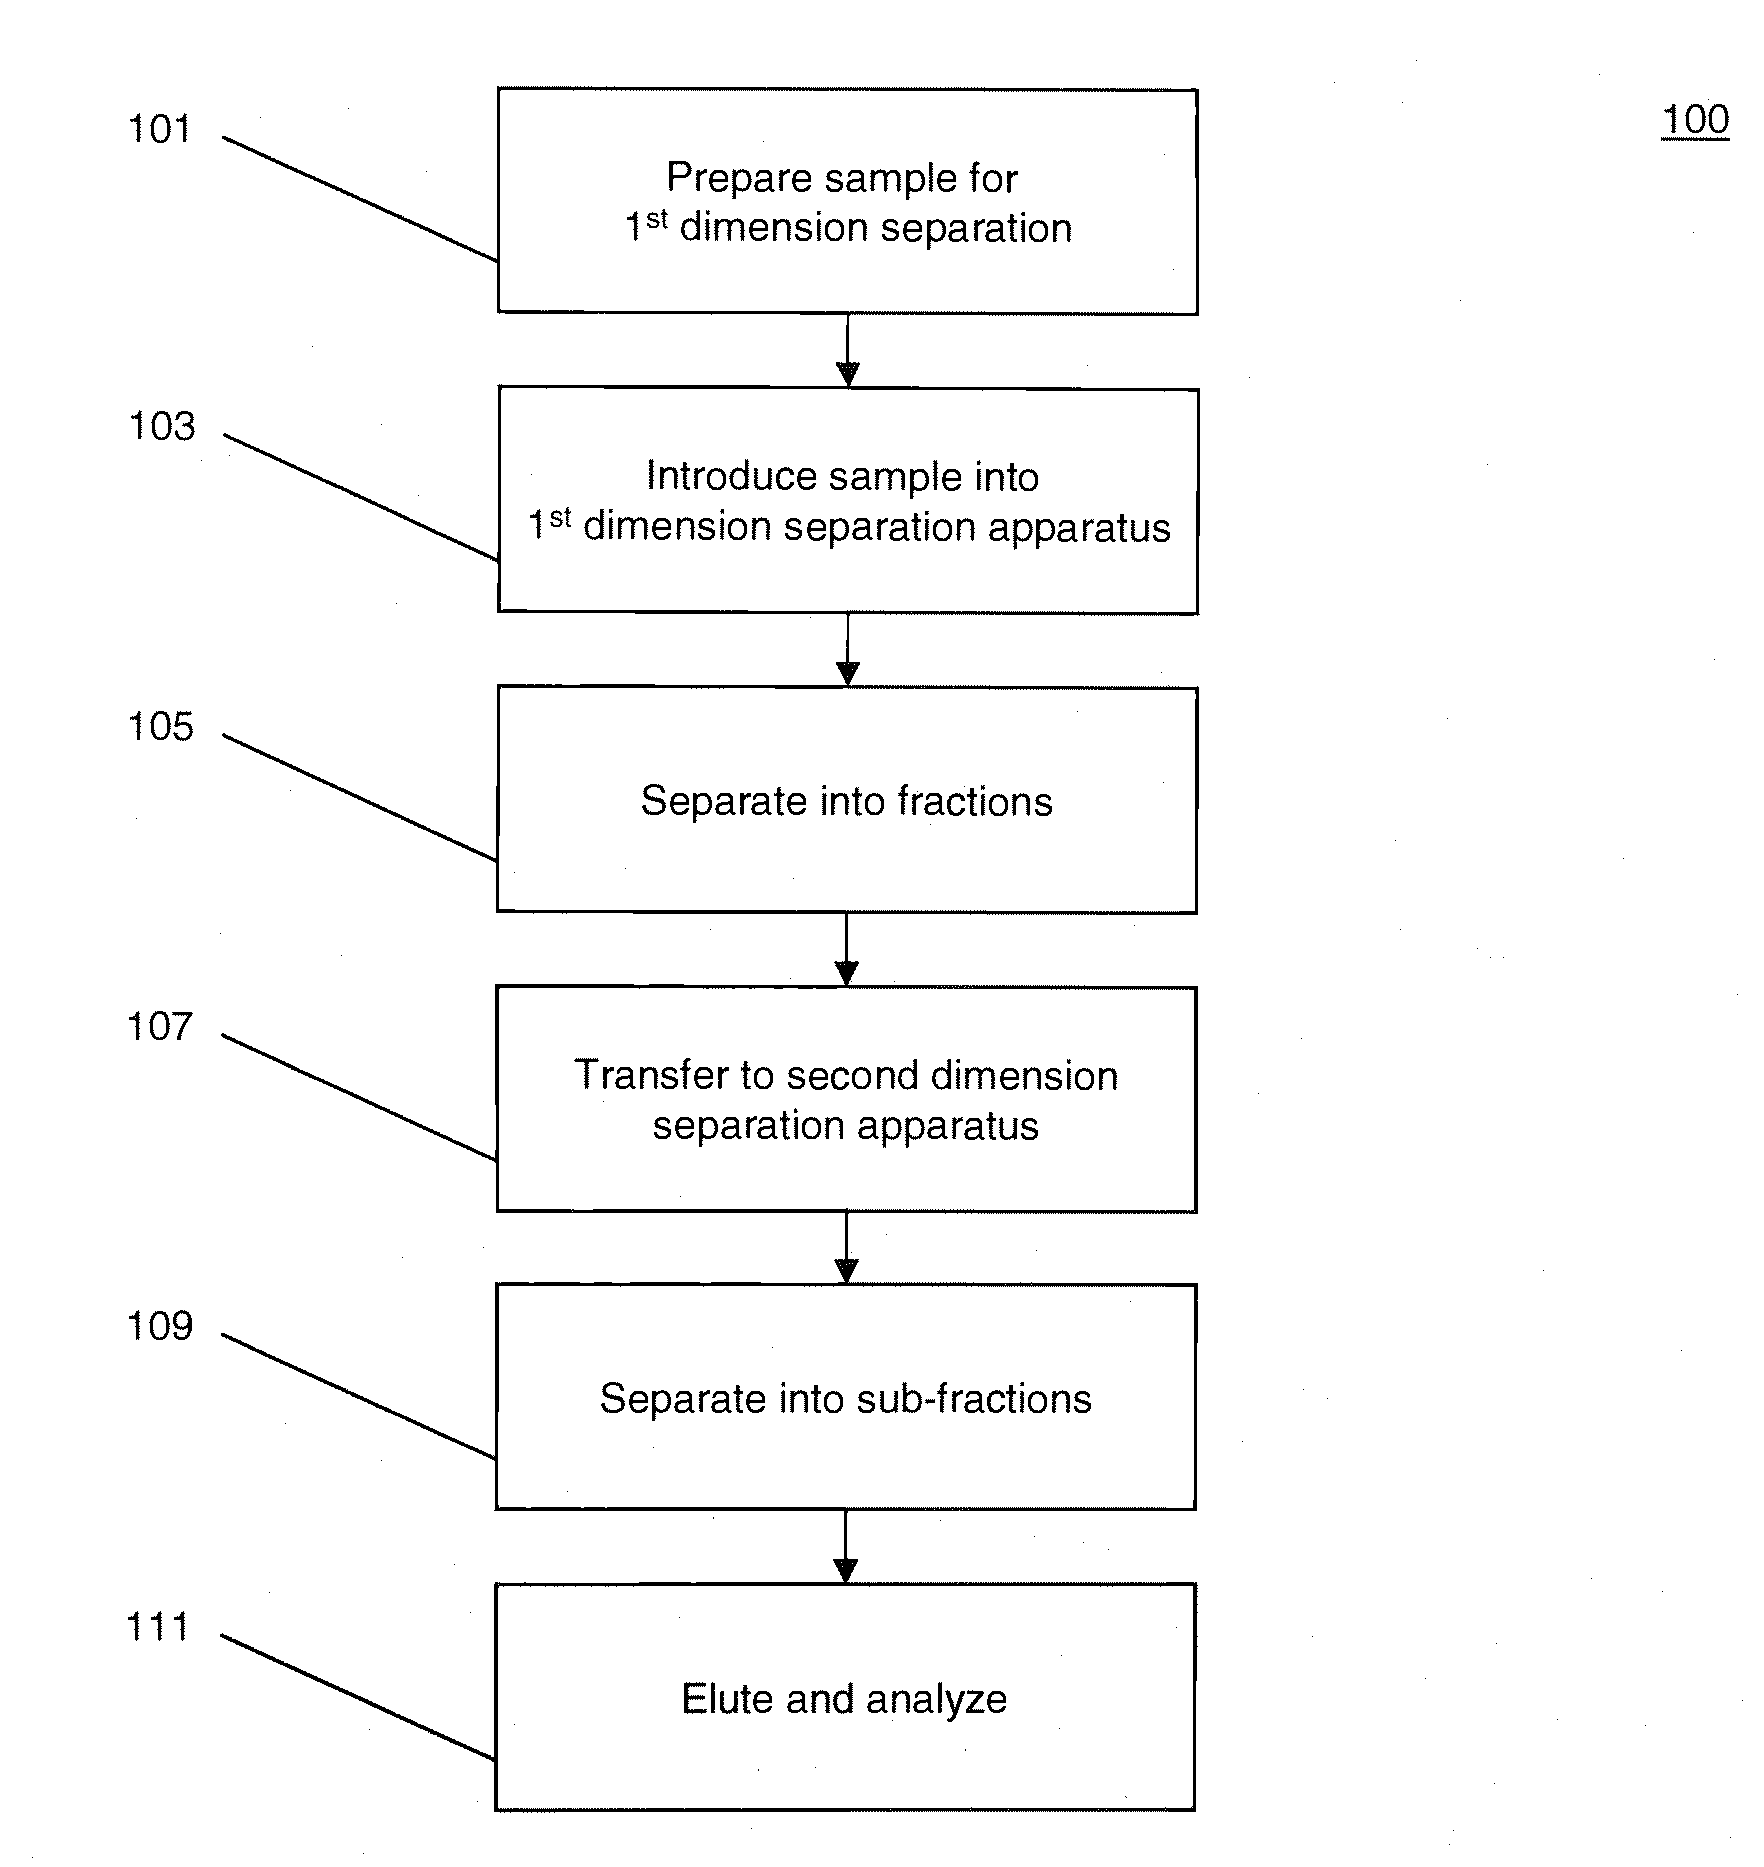 Methods and systems for multidimensional concentration and separation of biomolecules using capillary isotachophoresis